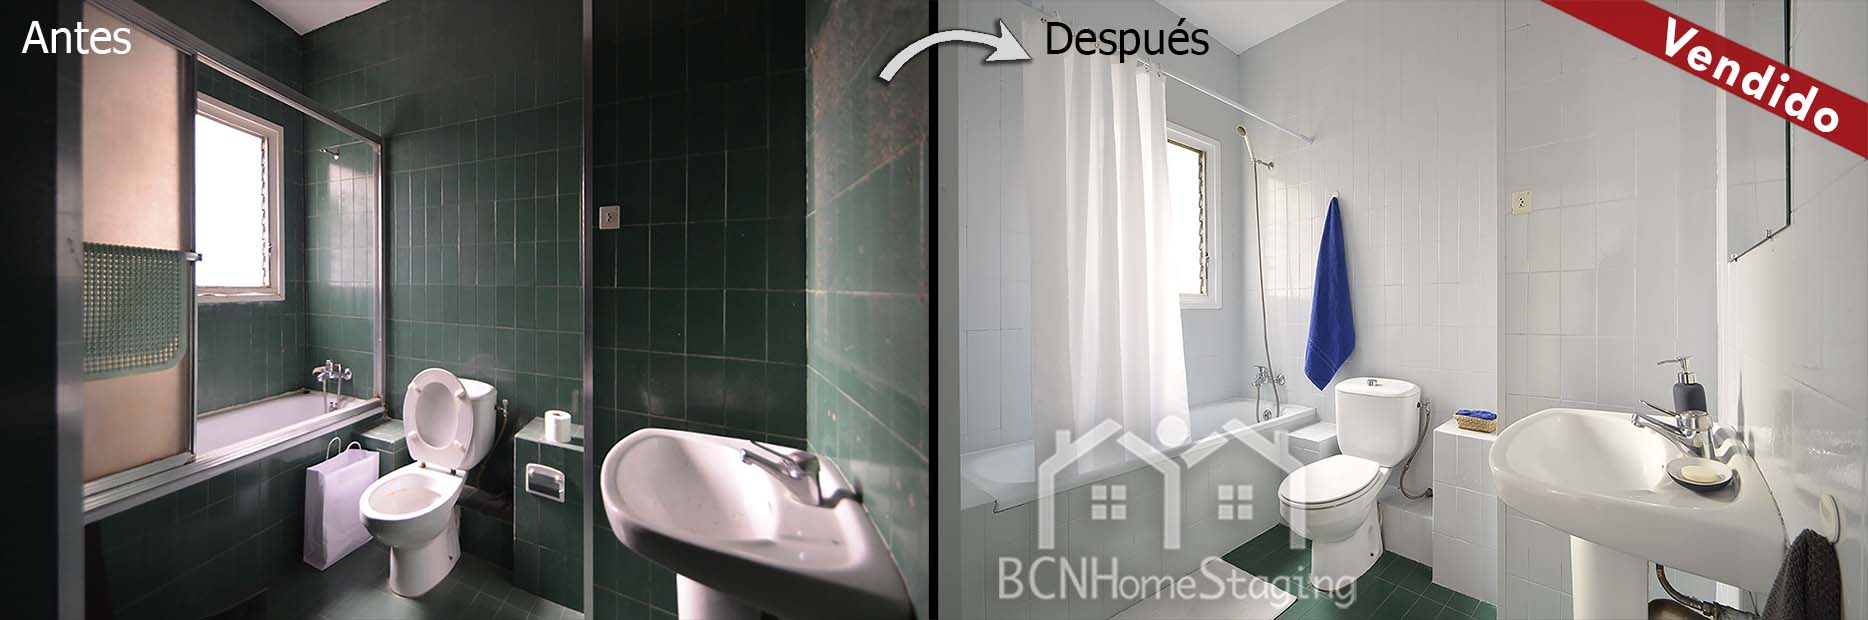 home-staging-barcelona-lavabo-antes-despues